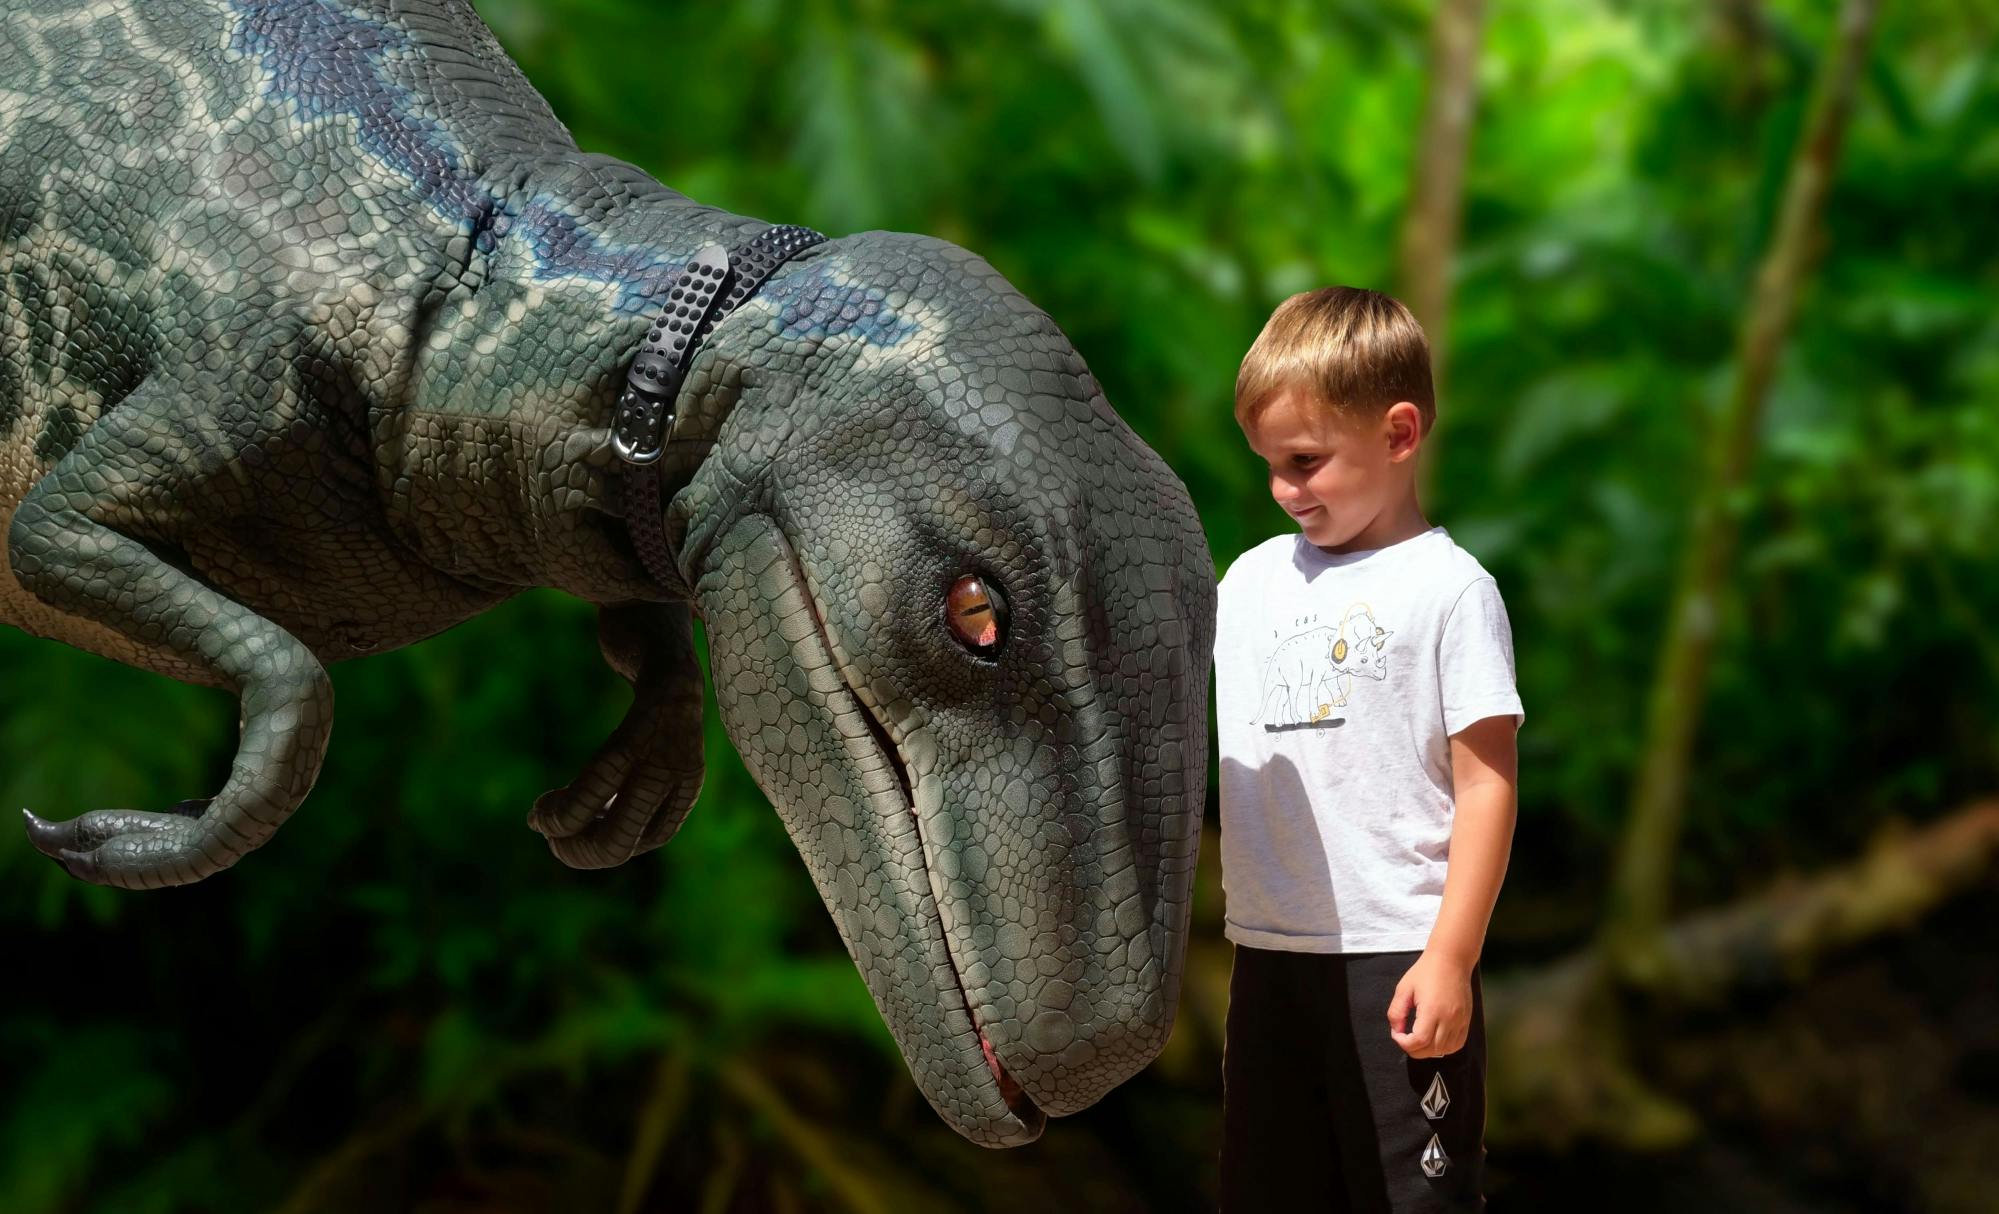 Guided Tour of Hams Caves with Dinosaurland Visit